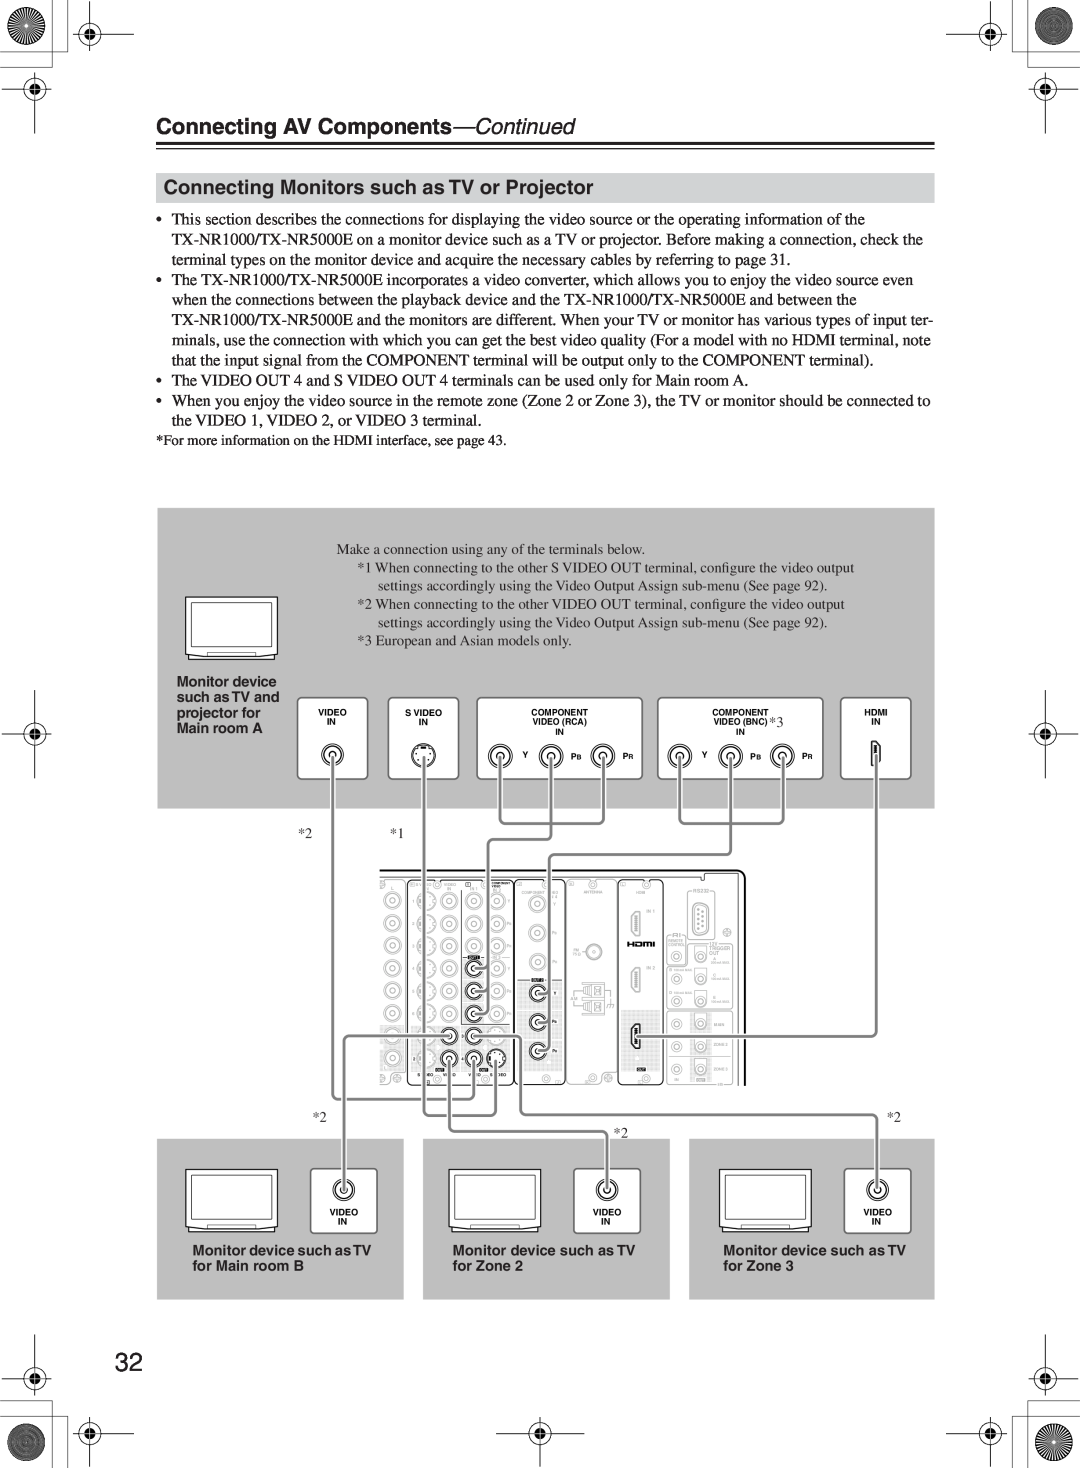 Onkyo TX-NR1000 instruction manual Connecting Monitors such as TV or Projector, Connecting AV Components—Continued 